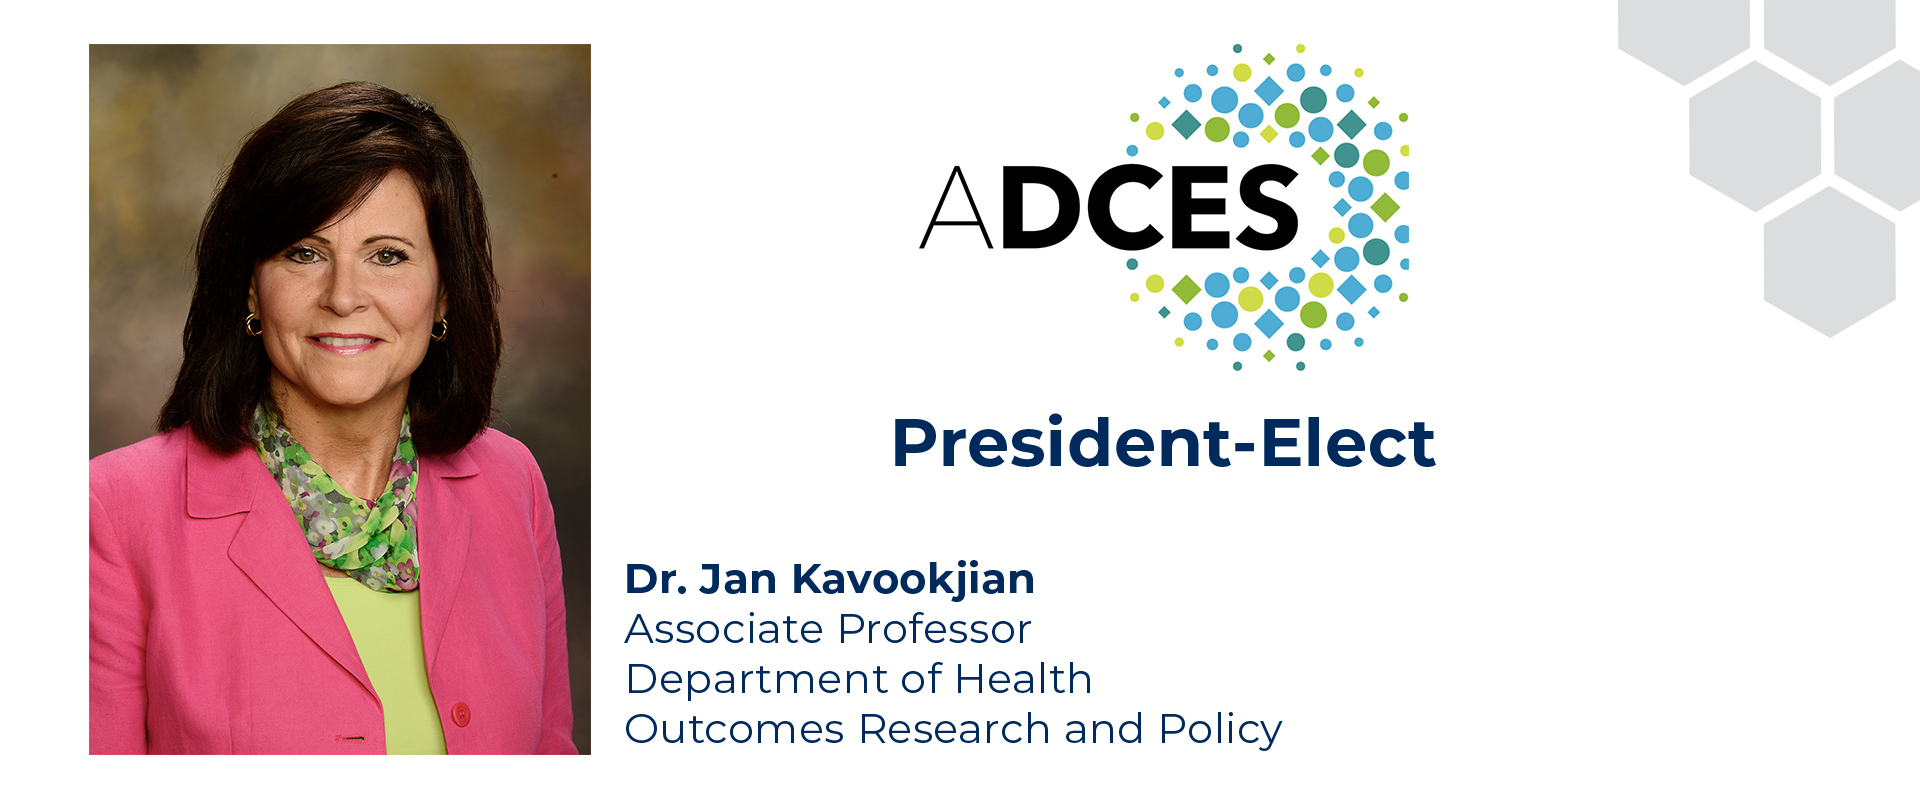 Head shot of Jan Kavookjian with name and title and ADCES logo